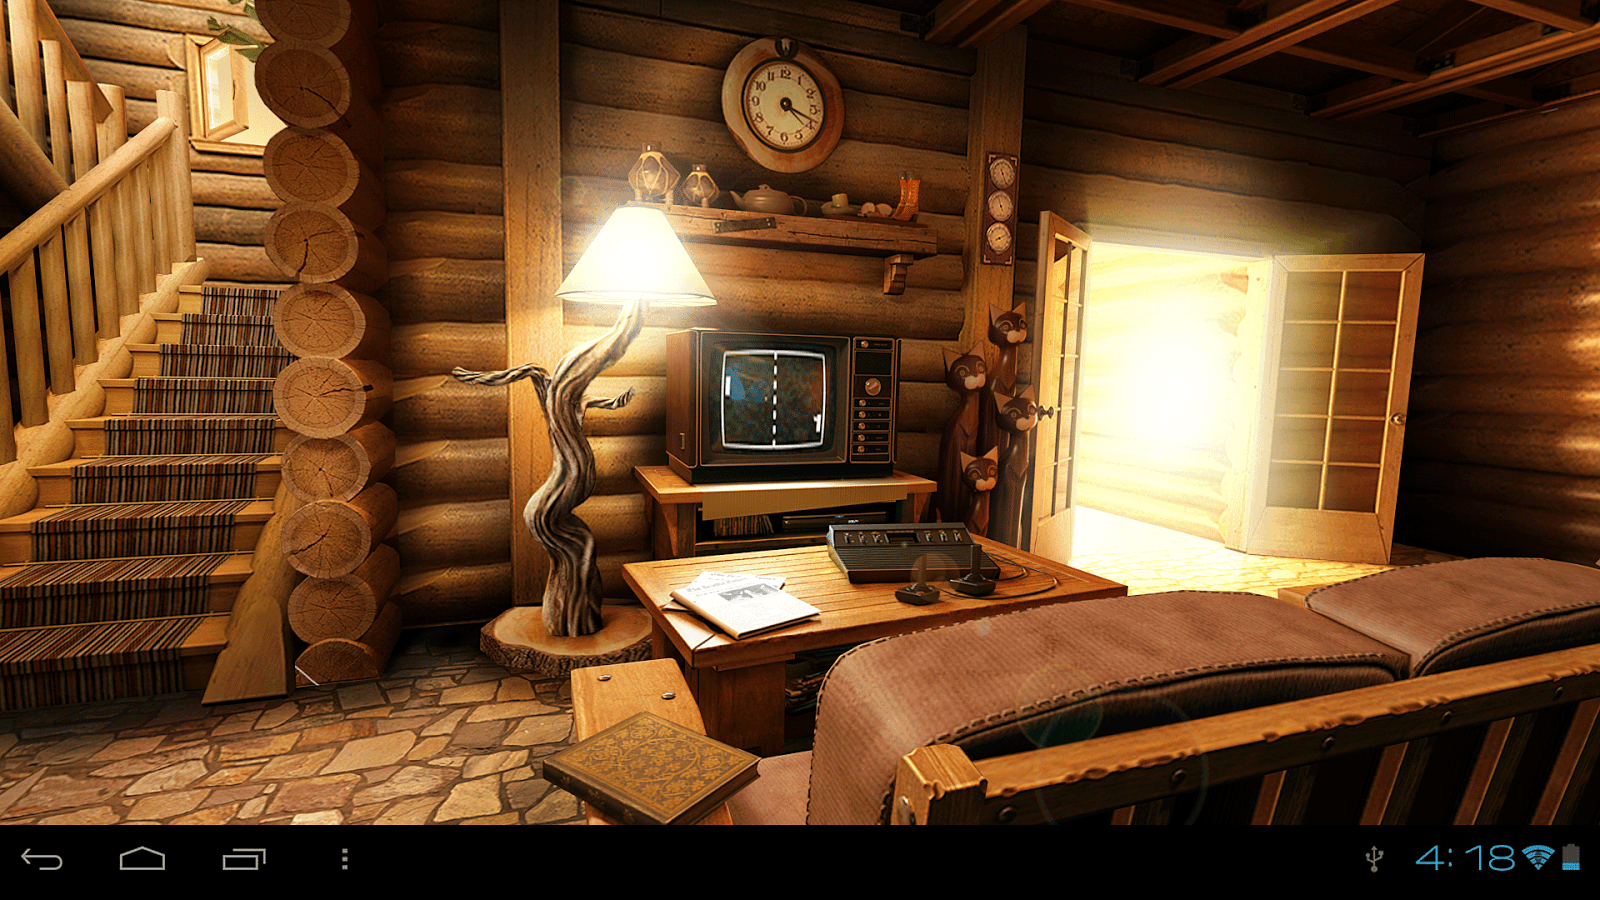 My Log Home 3D Live wallpaper Apps on Google Play